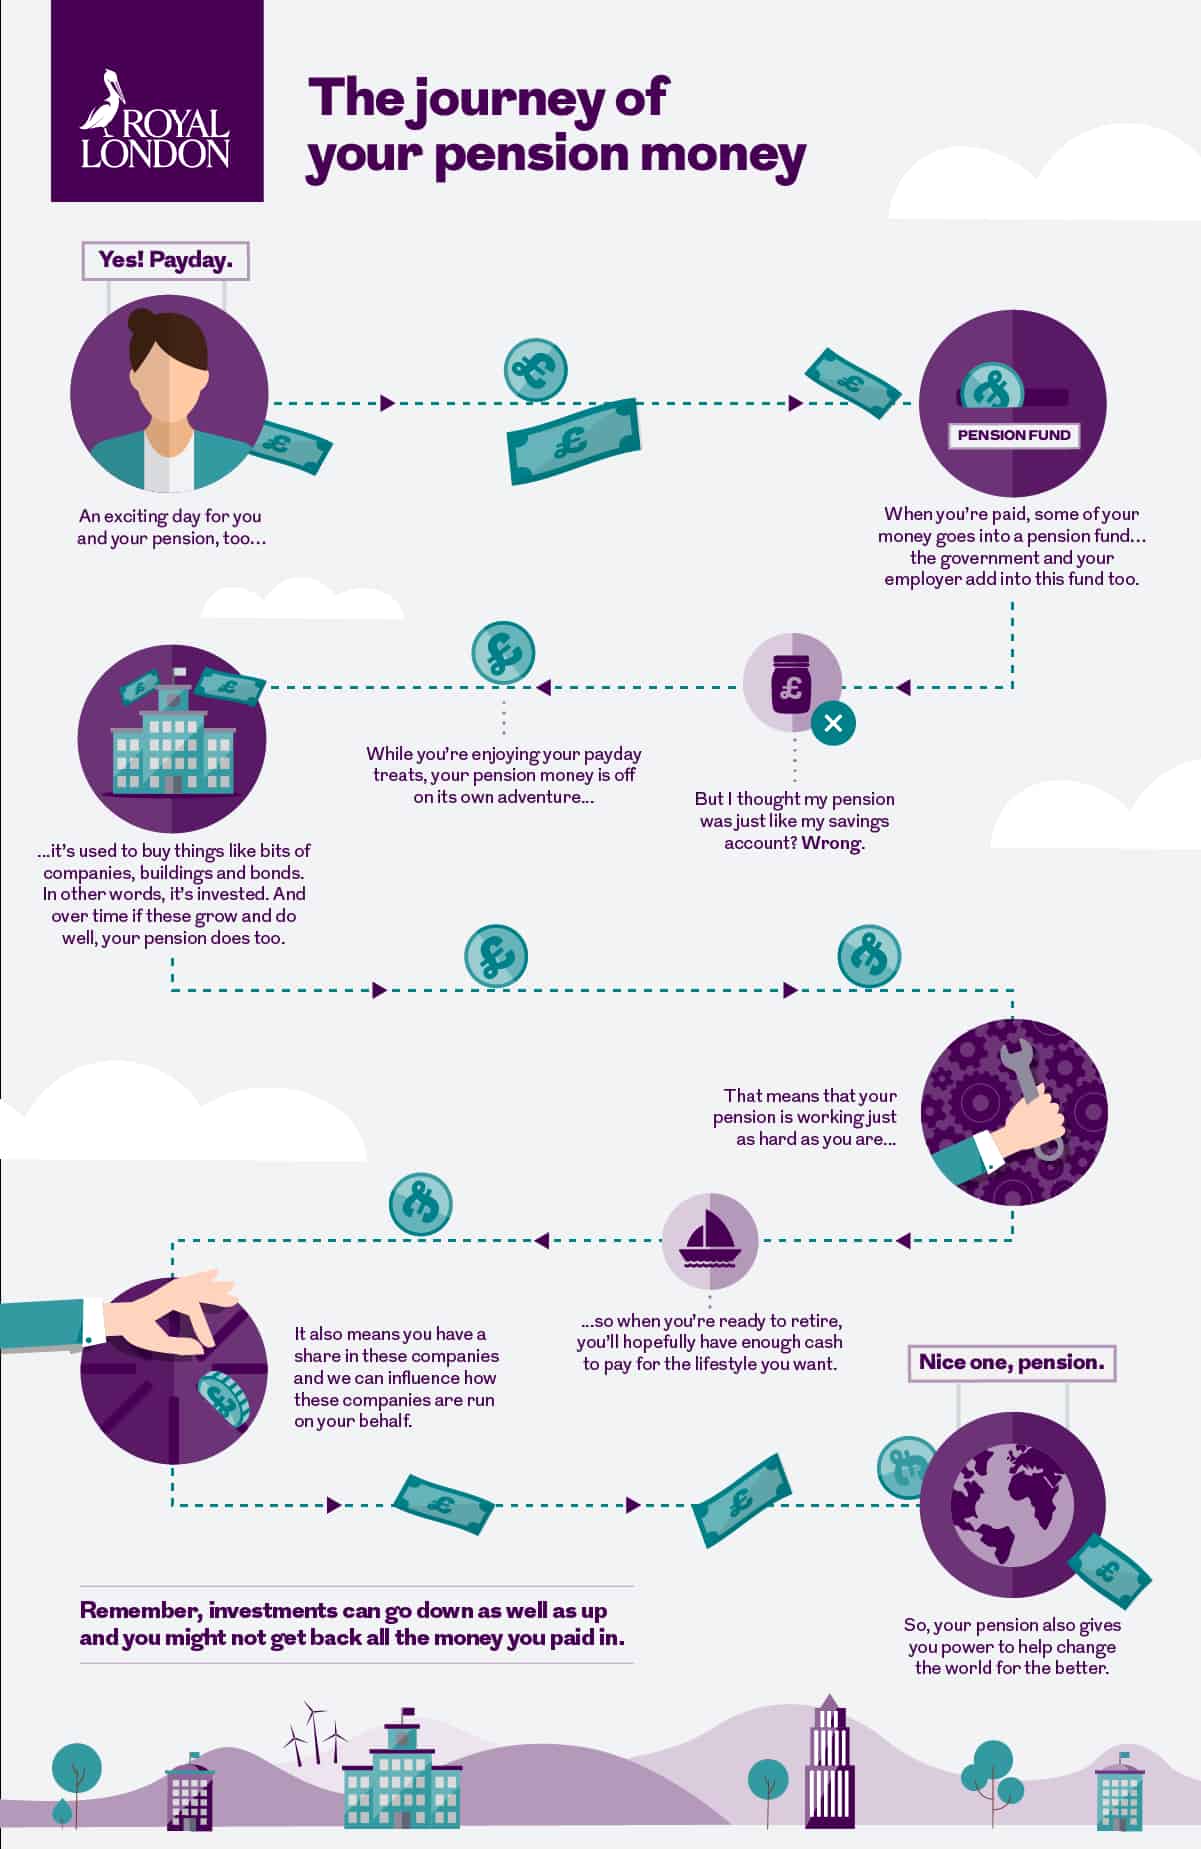 The Journey of your pension money infographic. This image is an infographic and has alternative text available if you are using a screen reader.